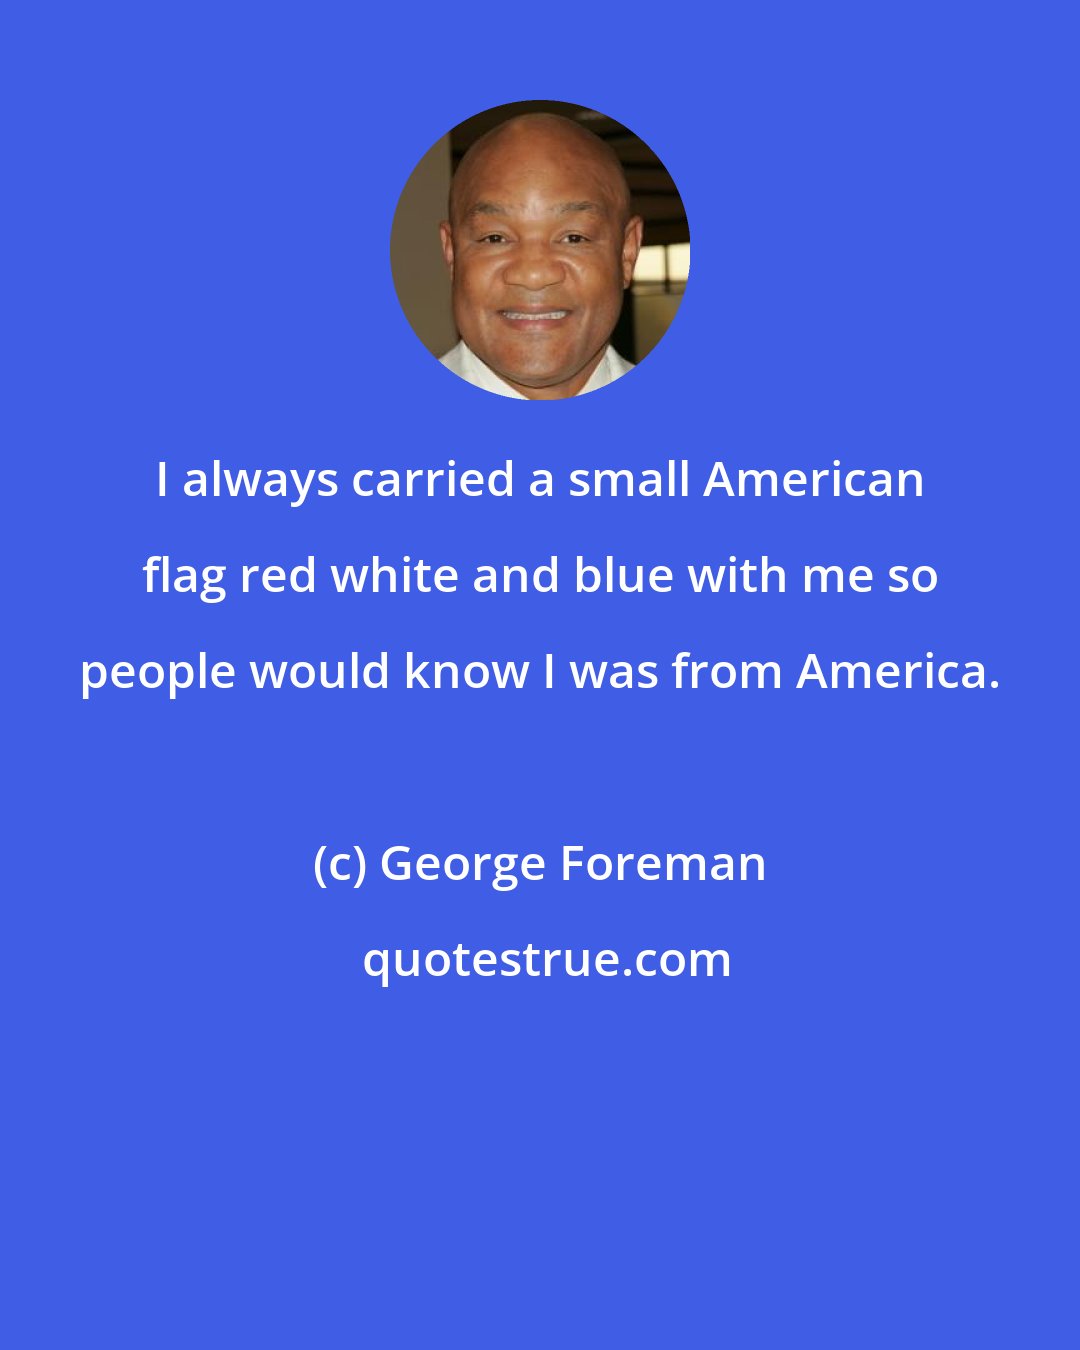 George Foreman: I always carried a small American flag red white and blue with me so people would know I was from America.